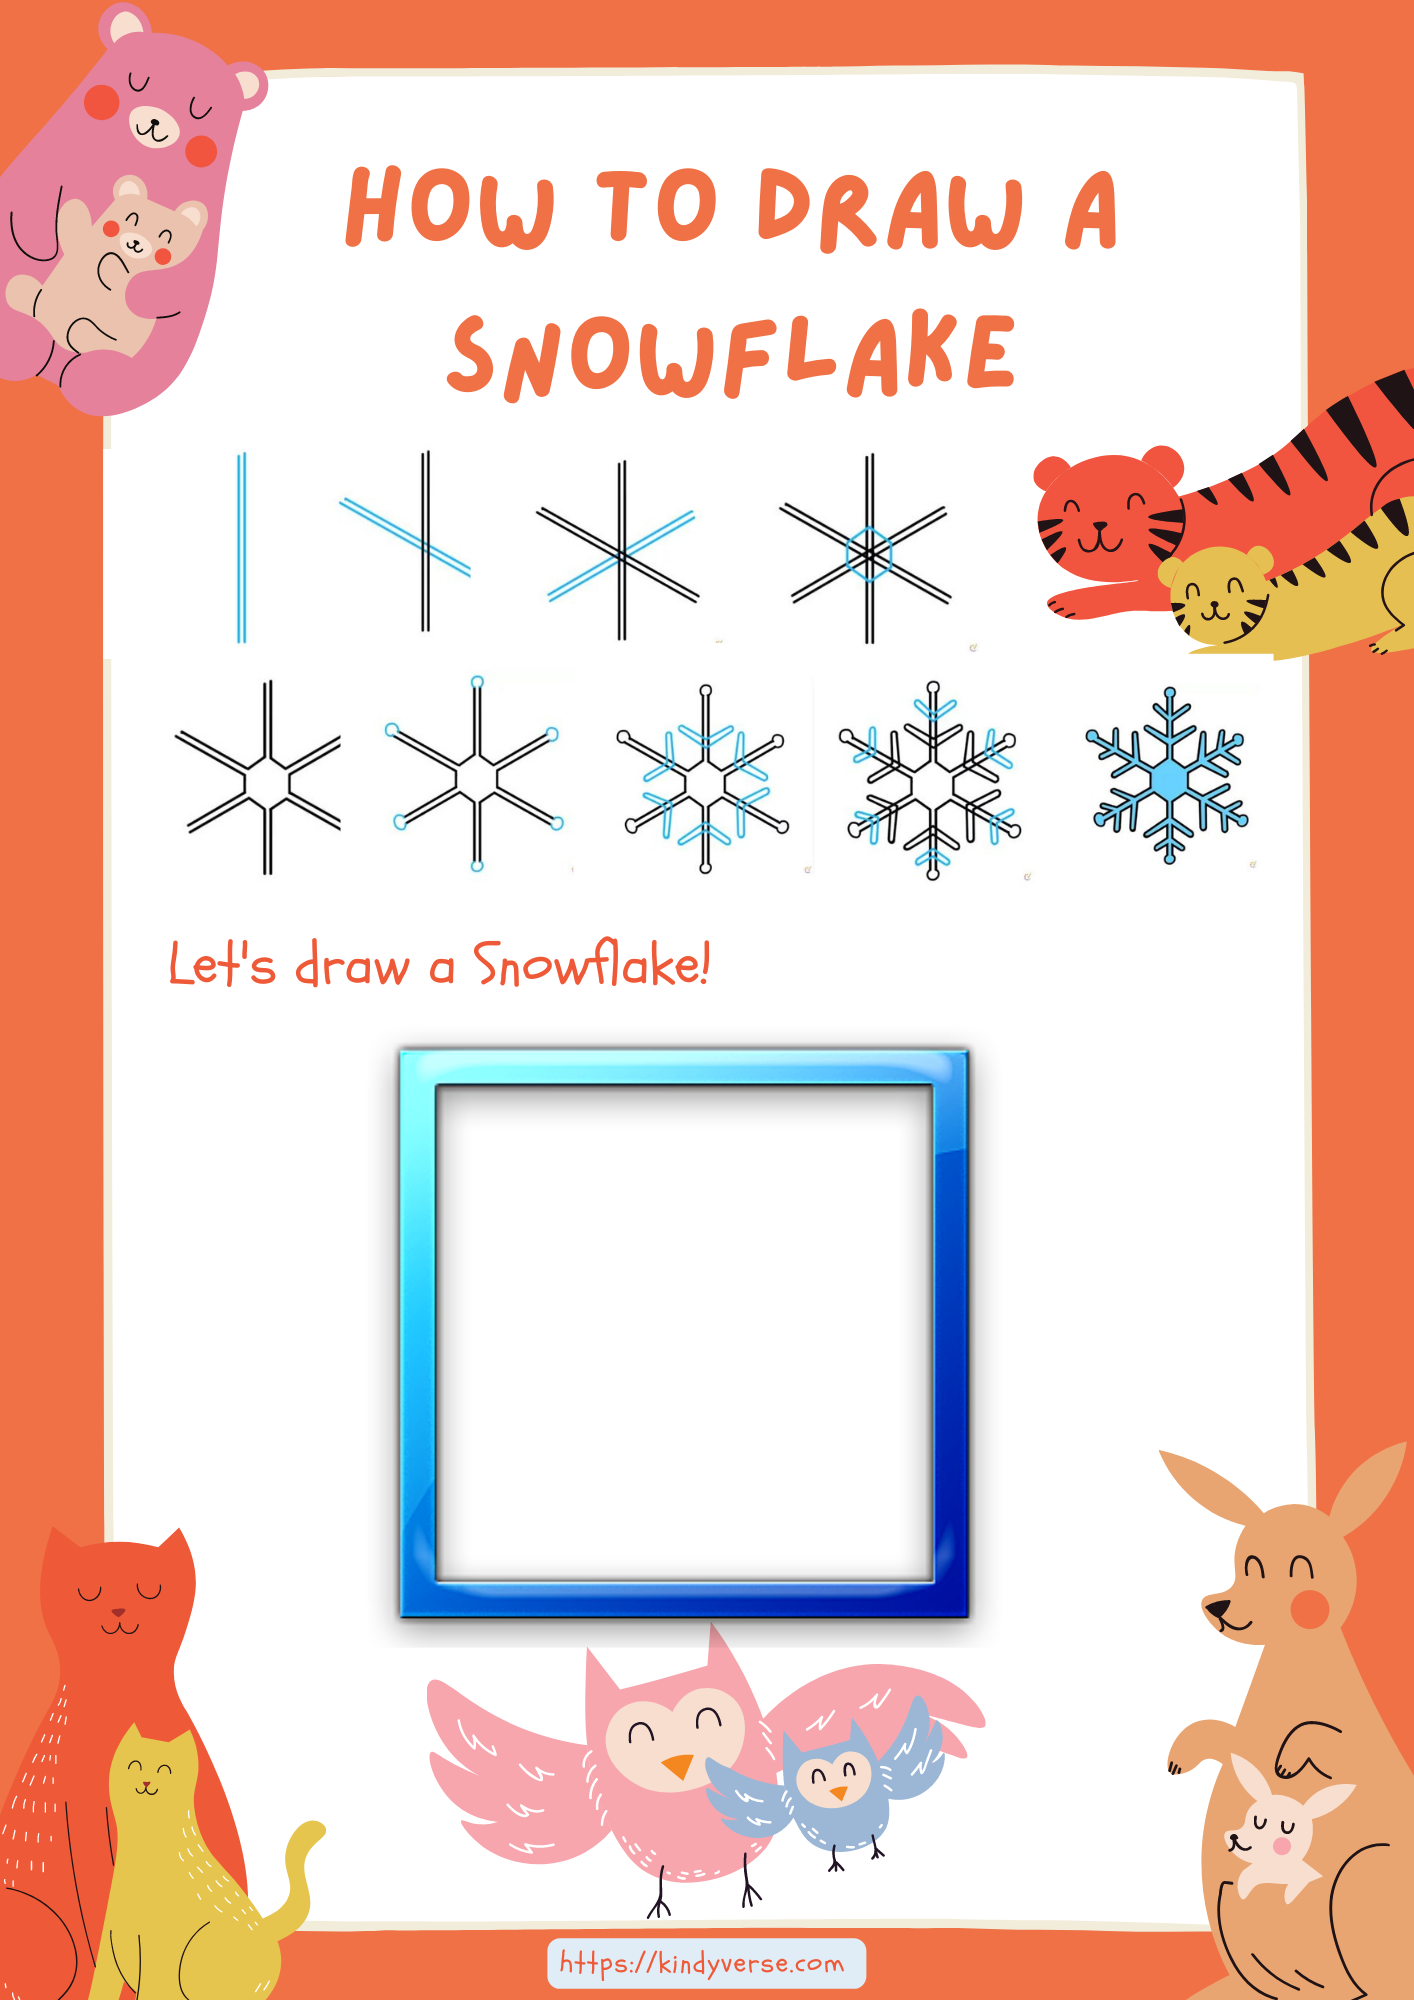 How-to-Draw-a-Snowflake-1